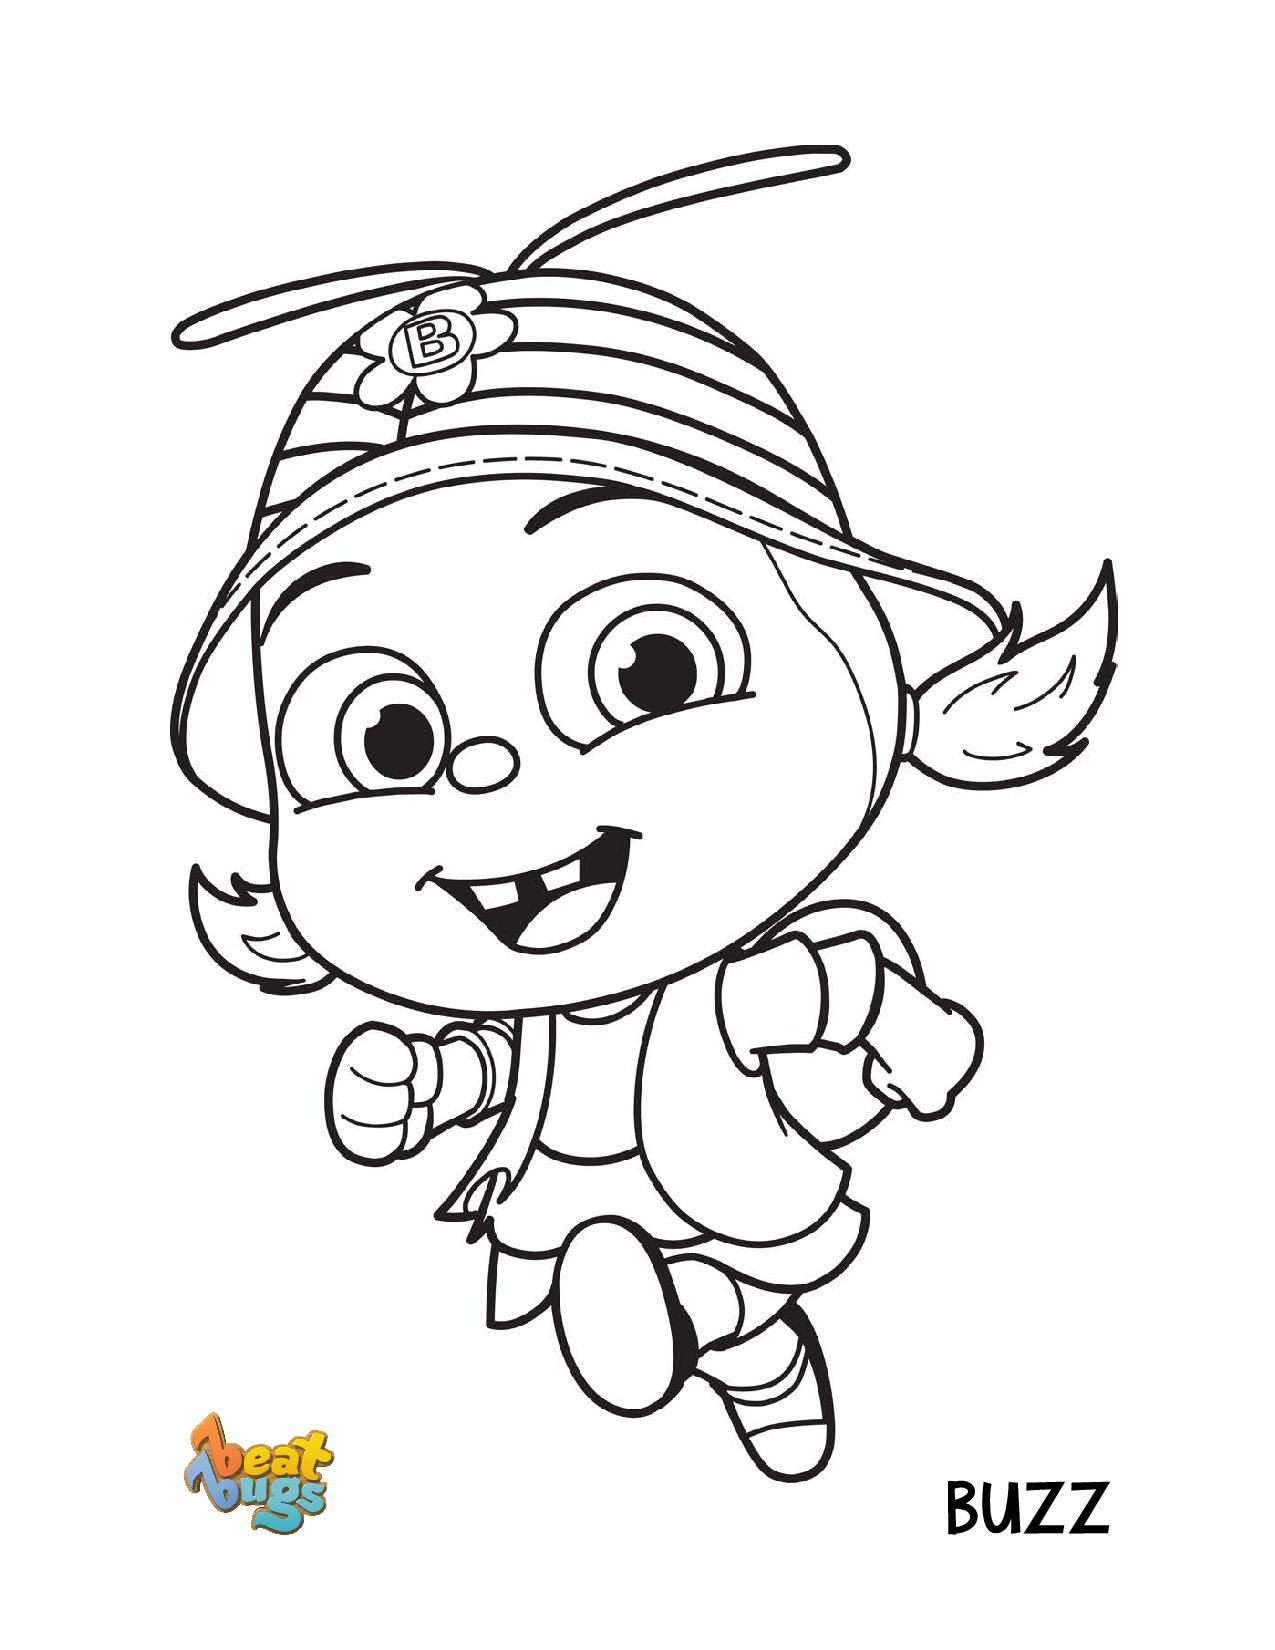 beat-bugs-coloring-pages-best-coloring-pages-for-kids